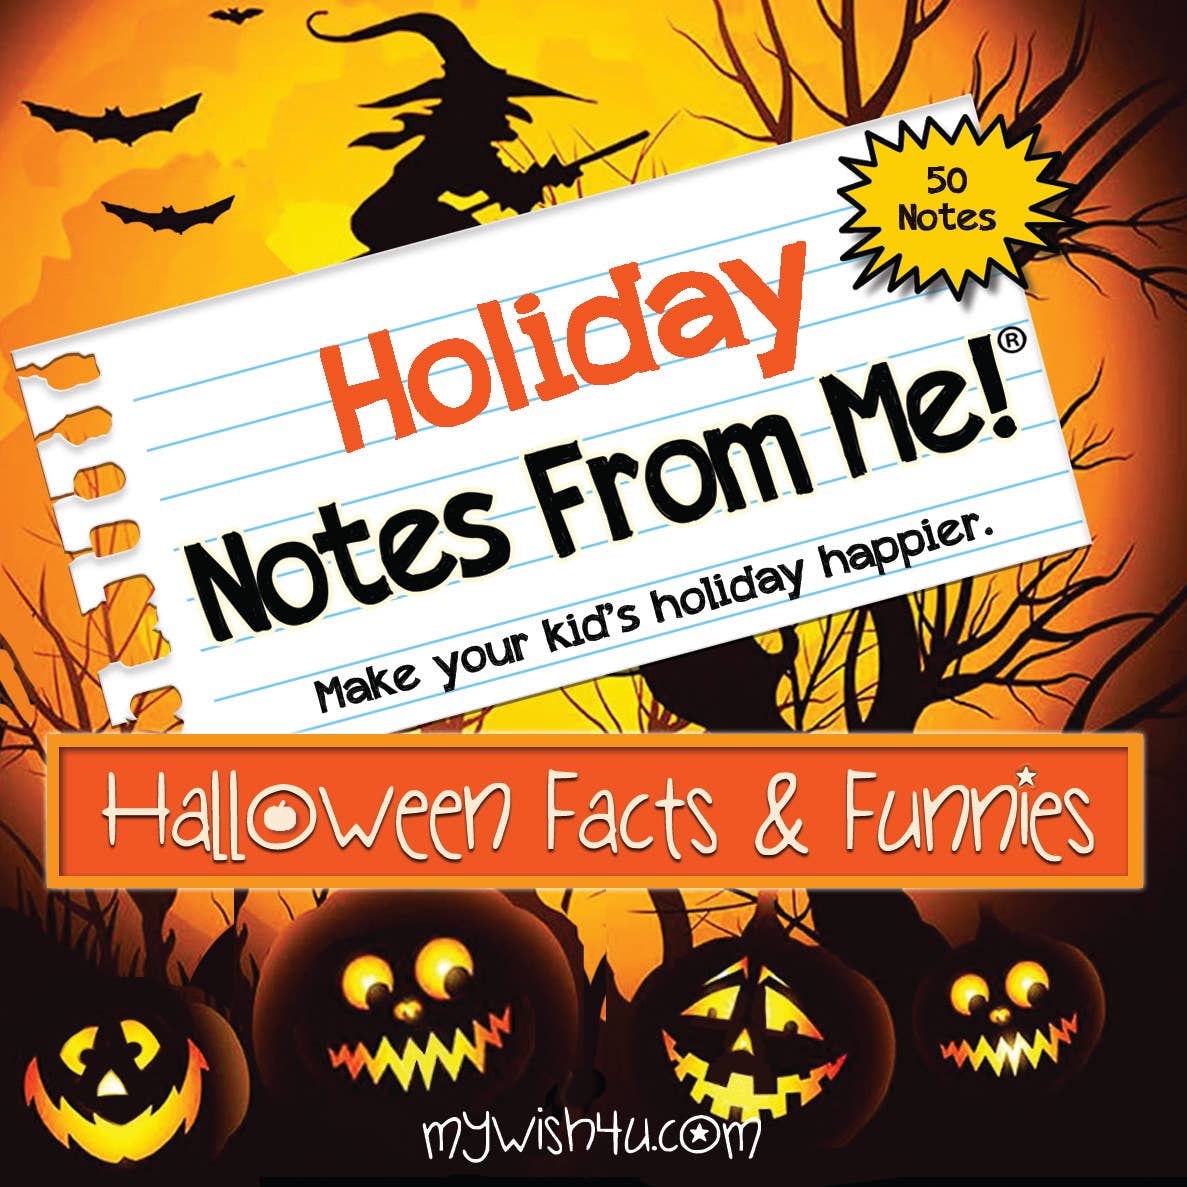 Holiday Notes From Me! Halloween